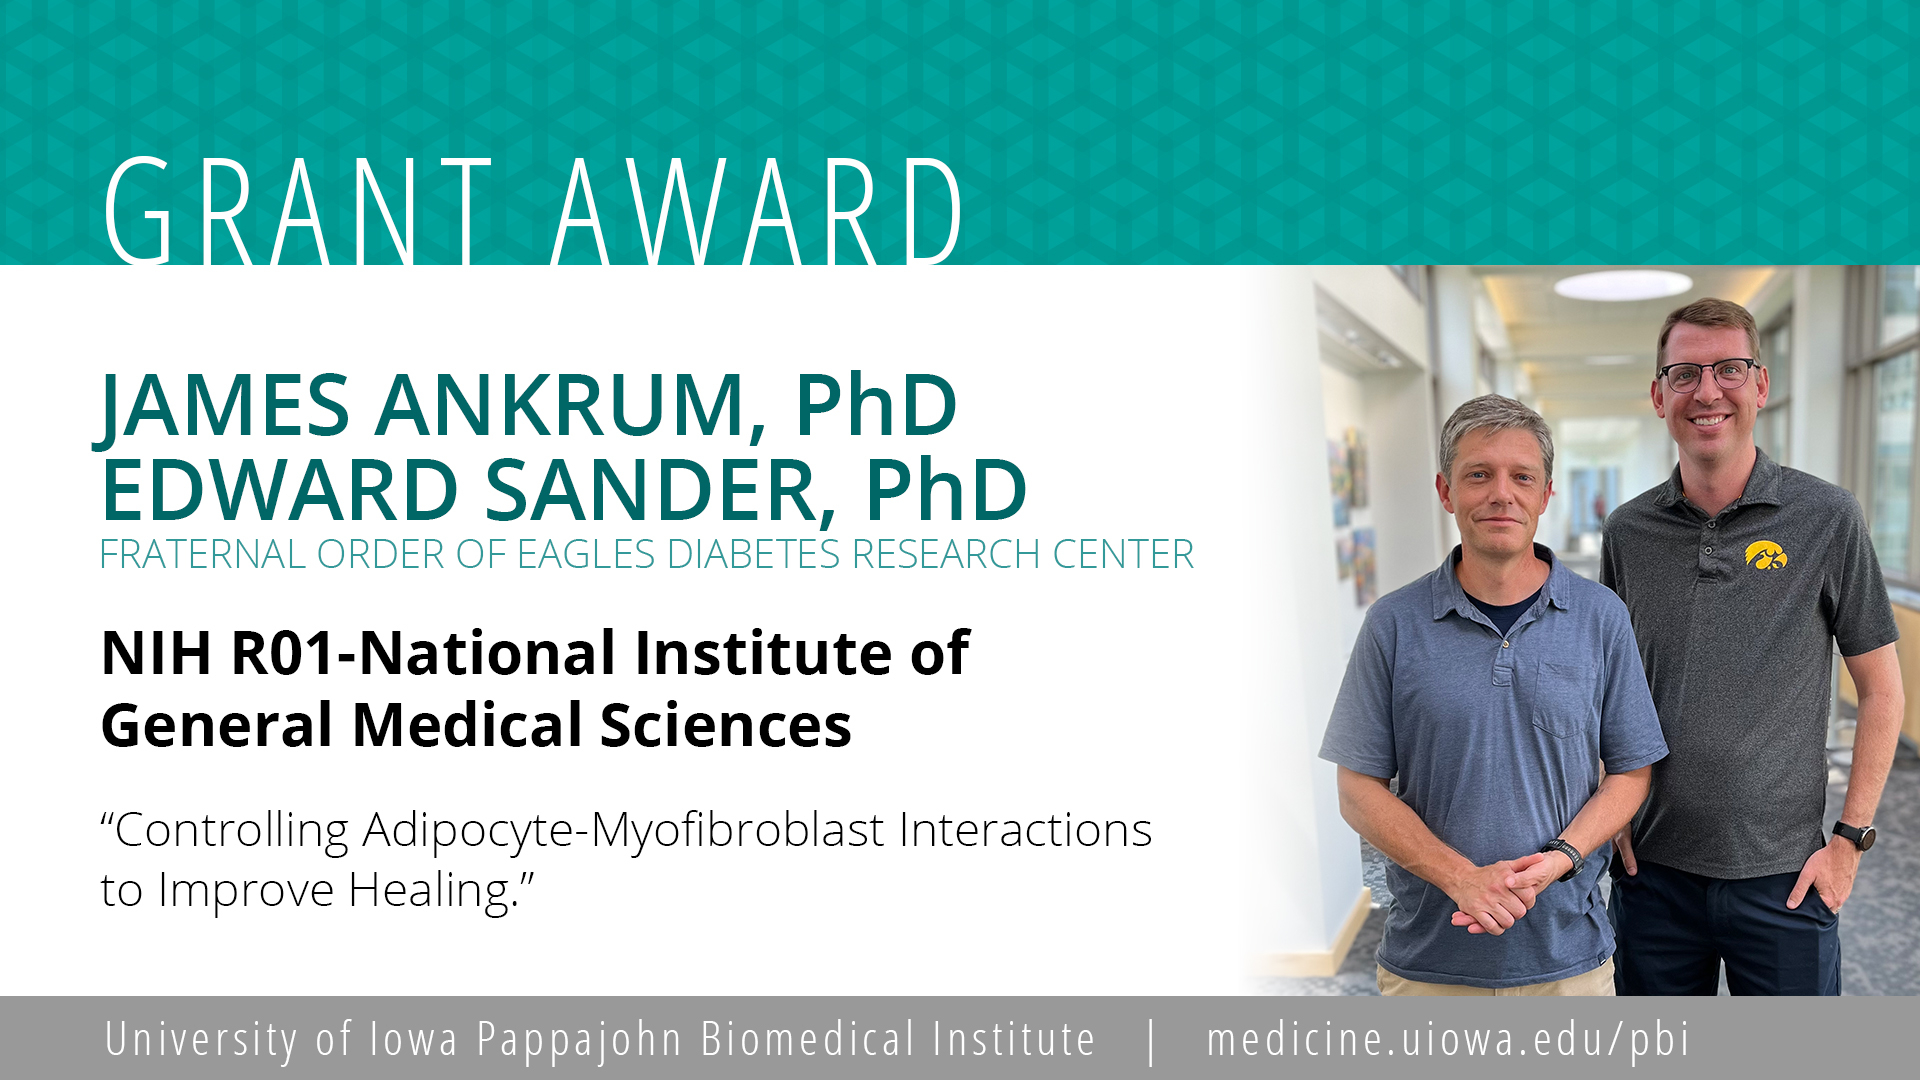 Ankrum and Sander grant award: Controlling adipocyte-myofibroblast interactions to improve healing